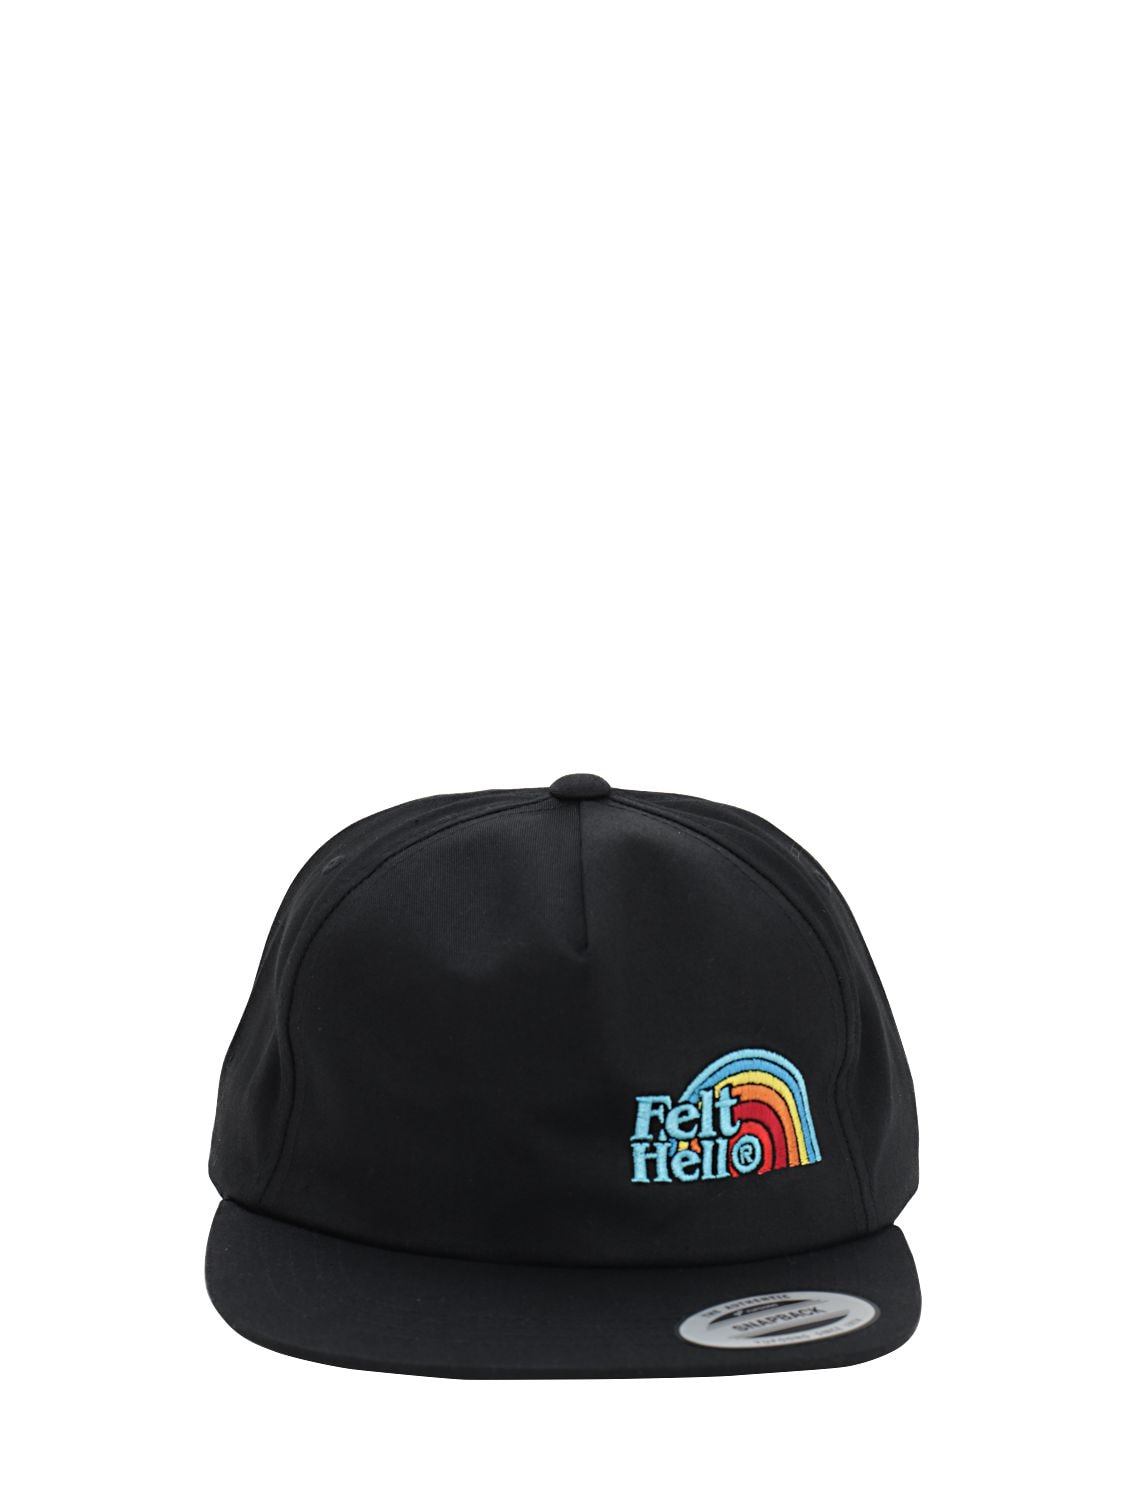 Felt - For Every Living Thing Felt Hell Embroidered Cap In Black